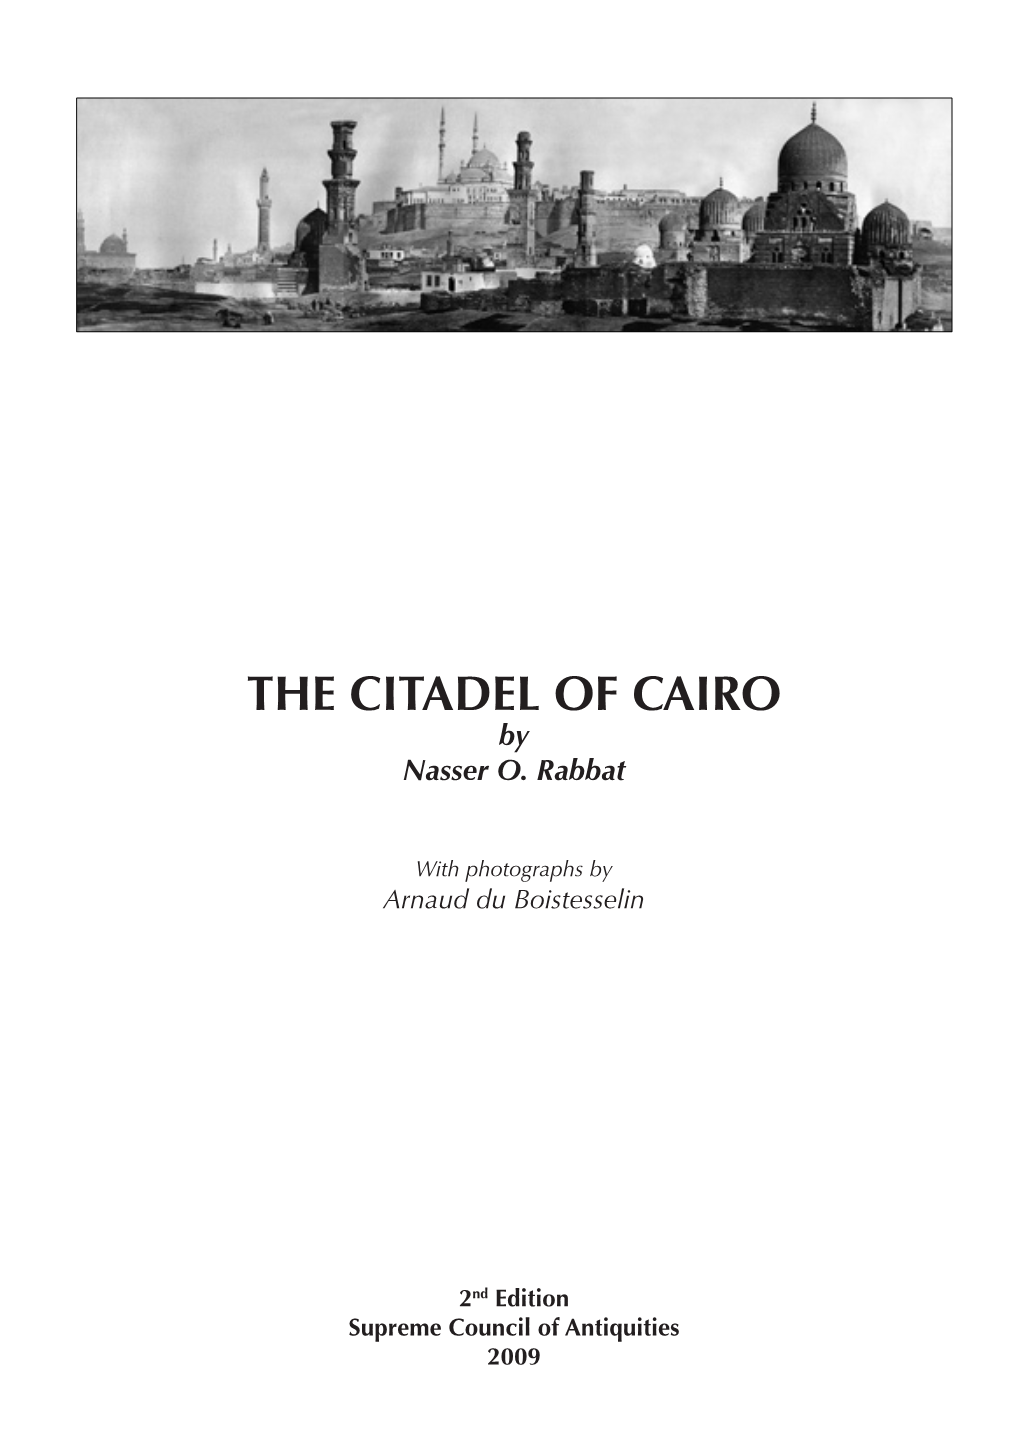 The Citadel of Cairo by Nasser O